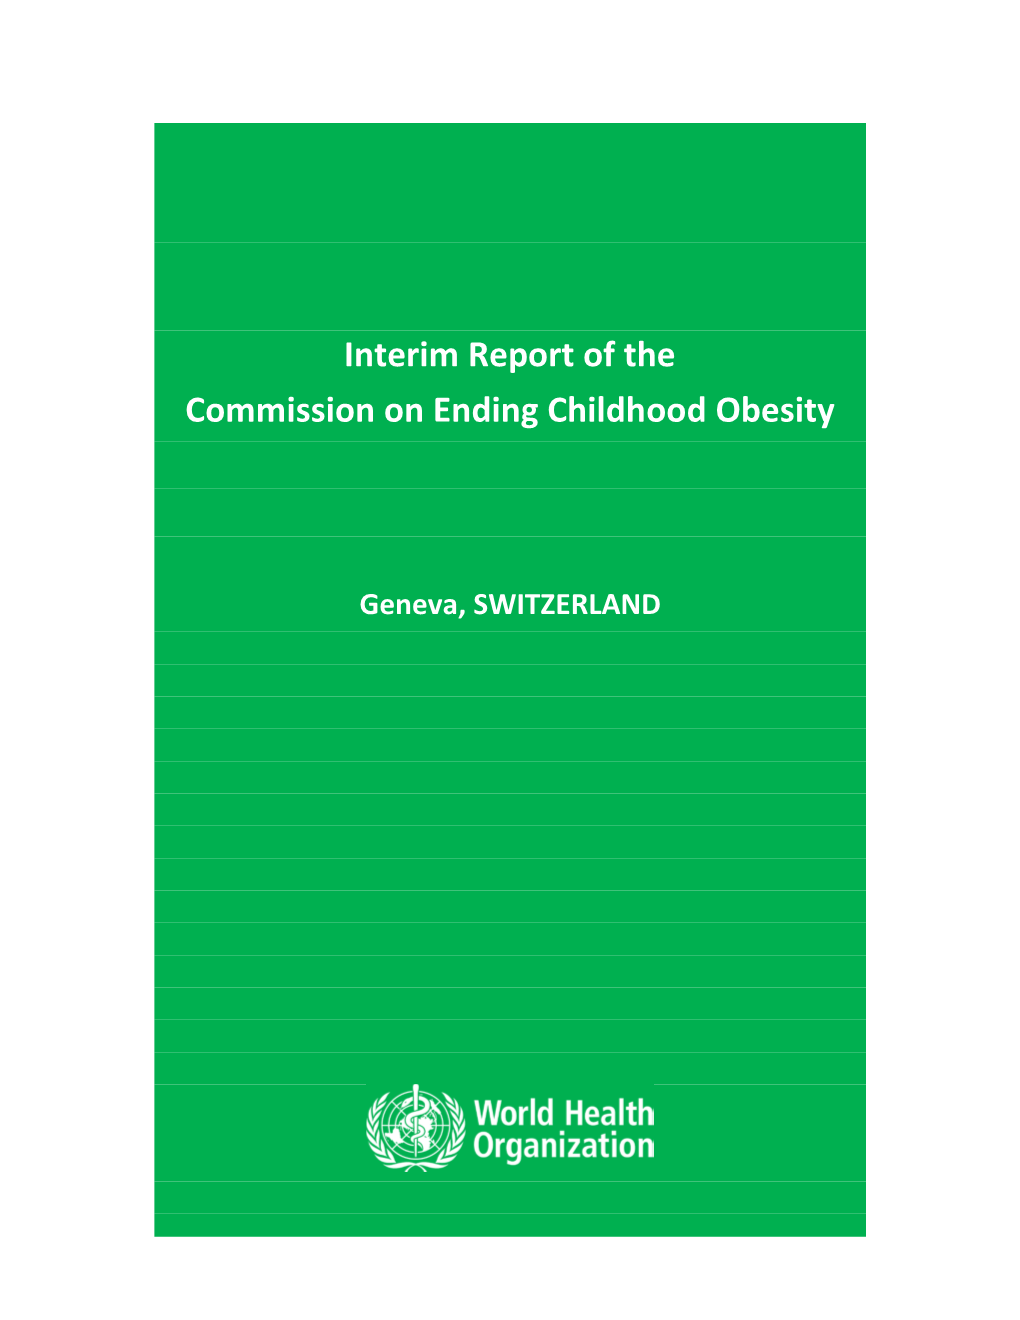 Interim Report of the Commission on Ending Childhood Obesity